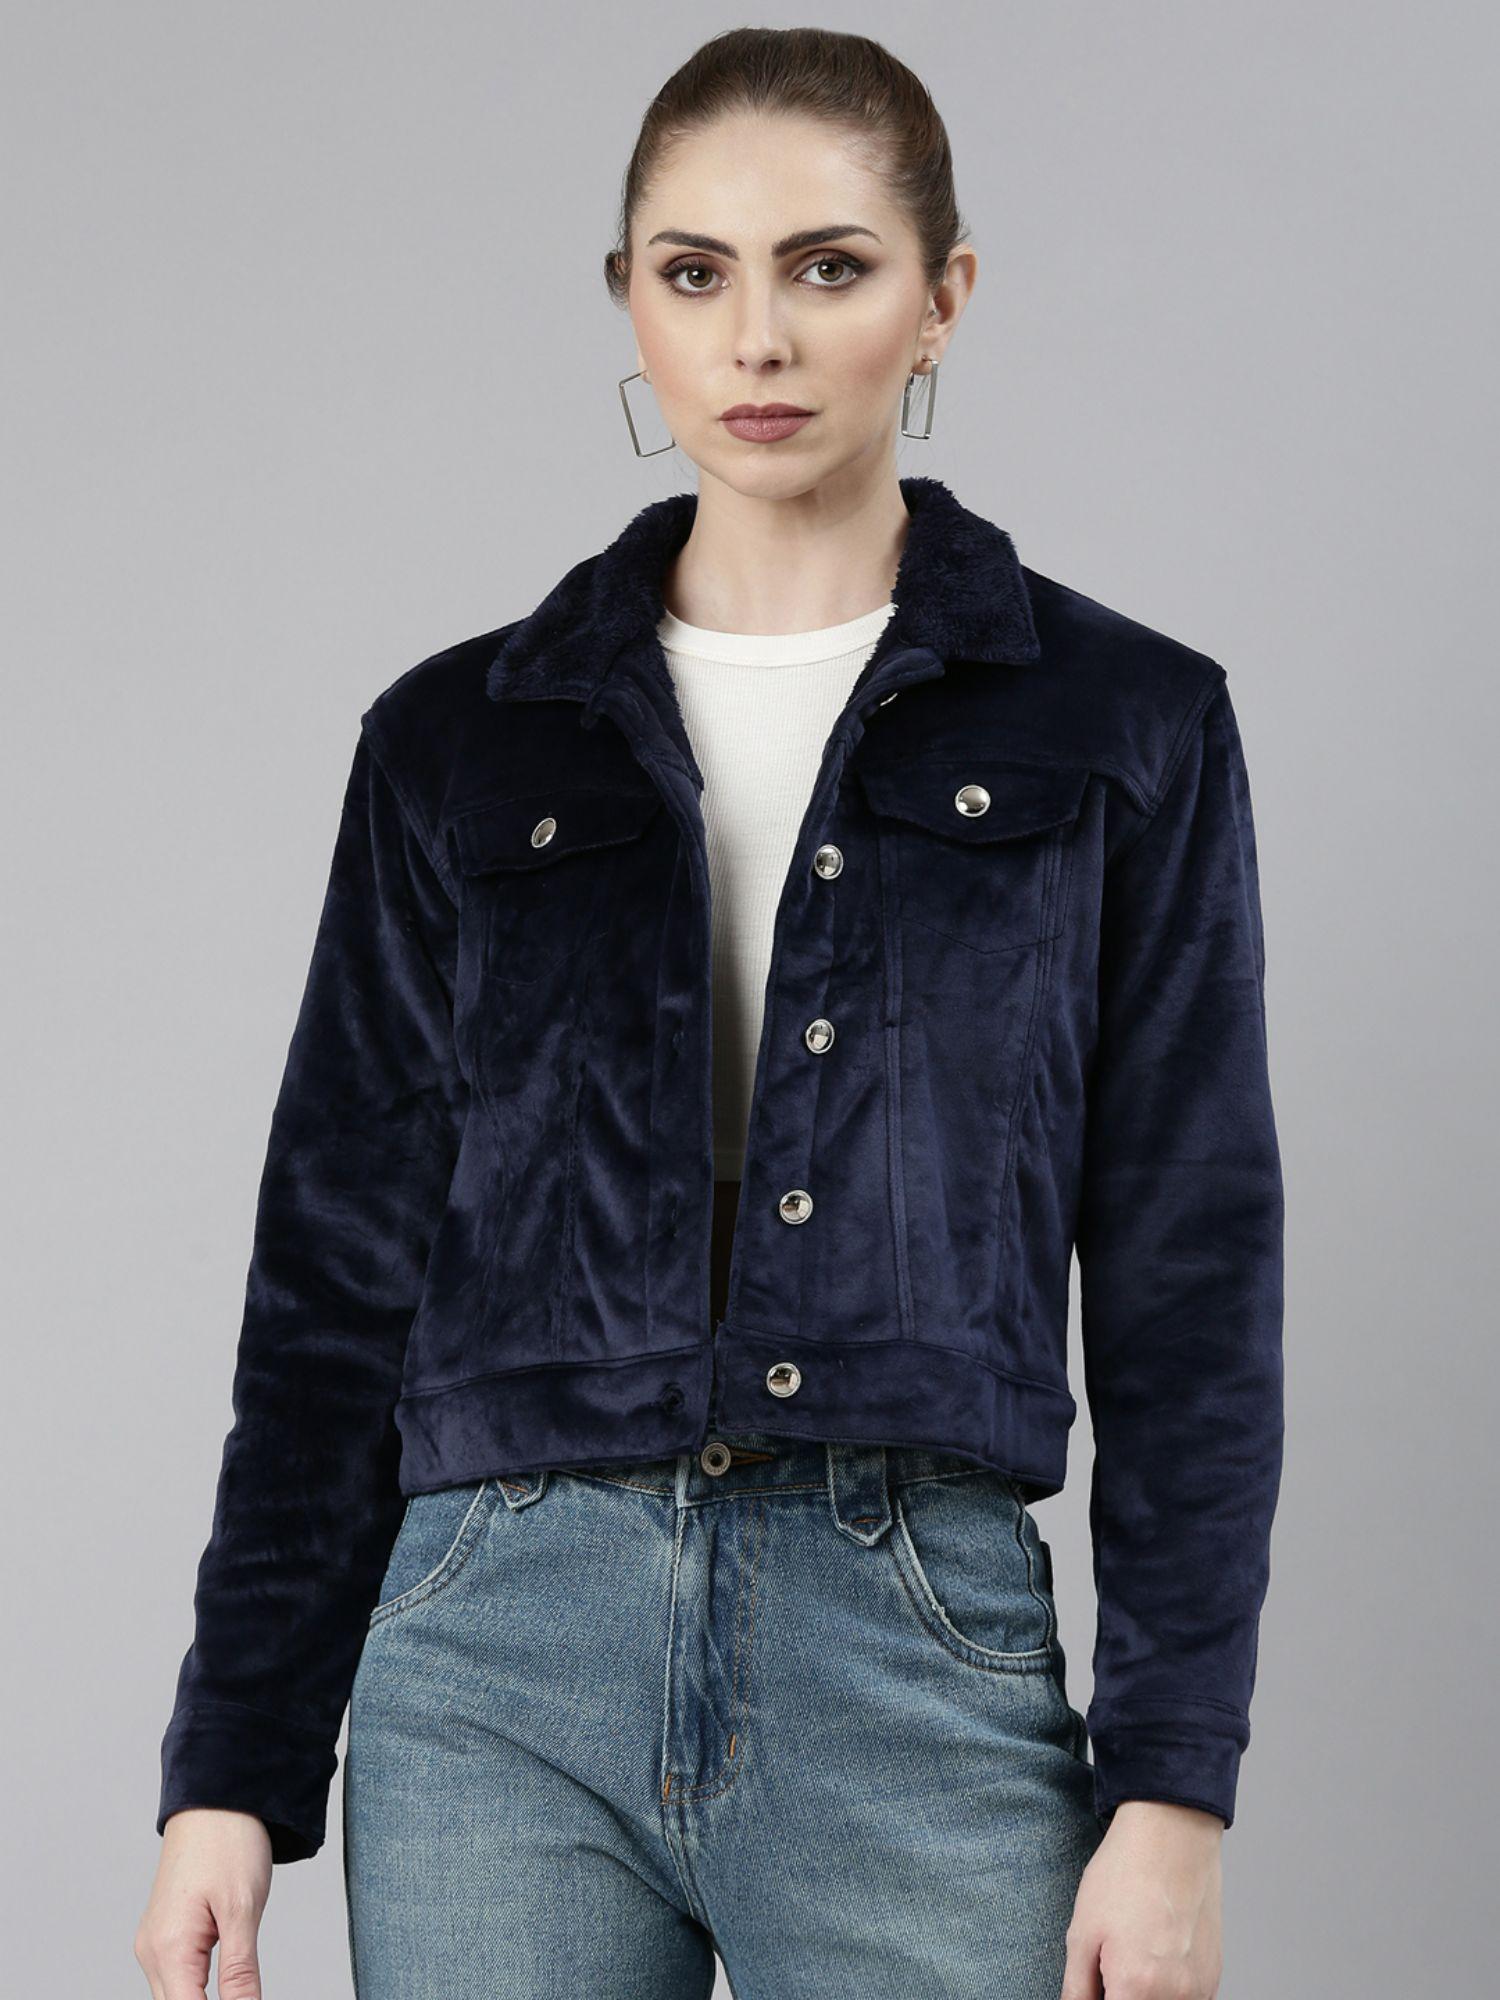 womens spread collar navy blue solid tailored jacket